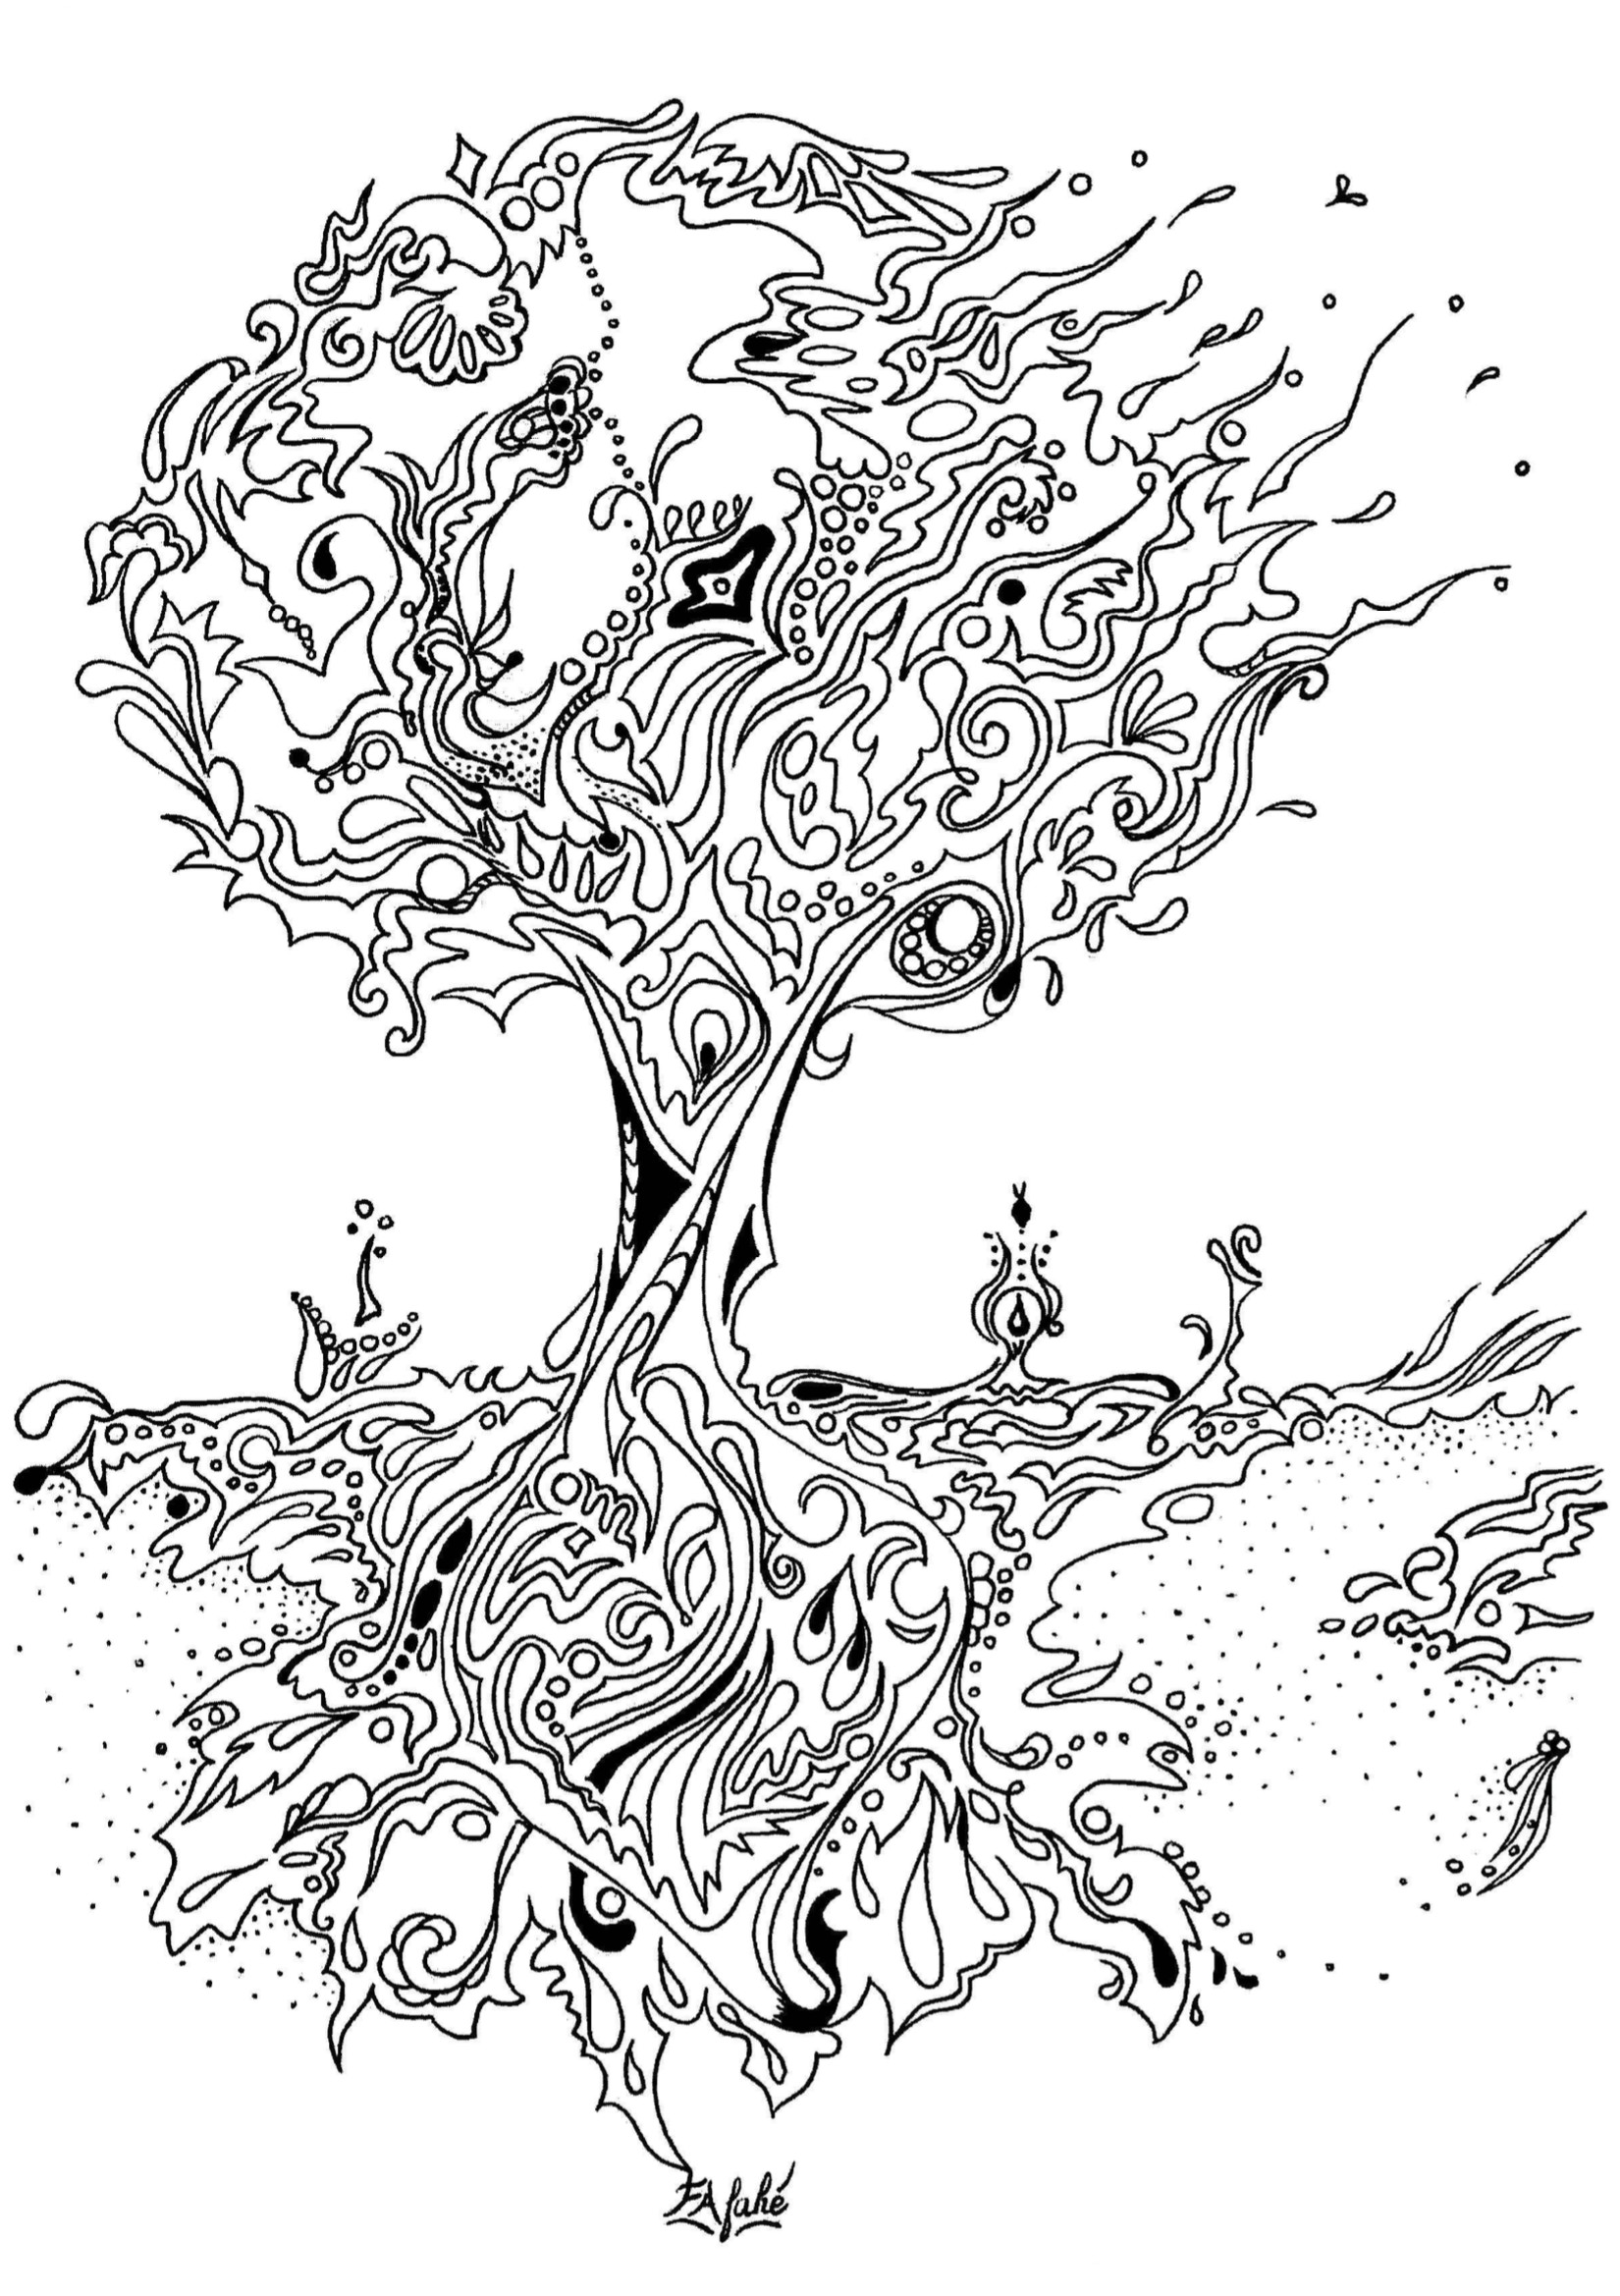 Coloring Pages For Adults Printable Free
 FREE Coloring Pages – Adult Coloring Worldwide